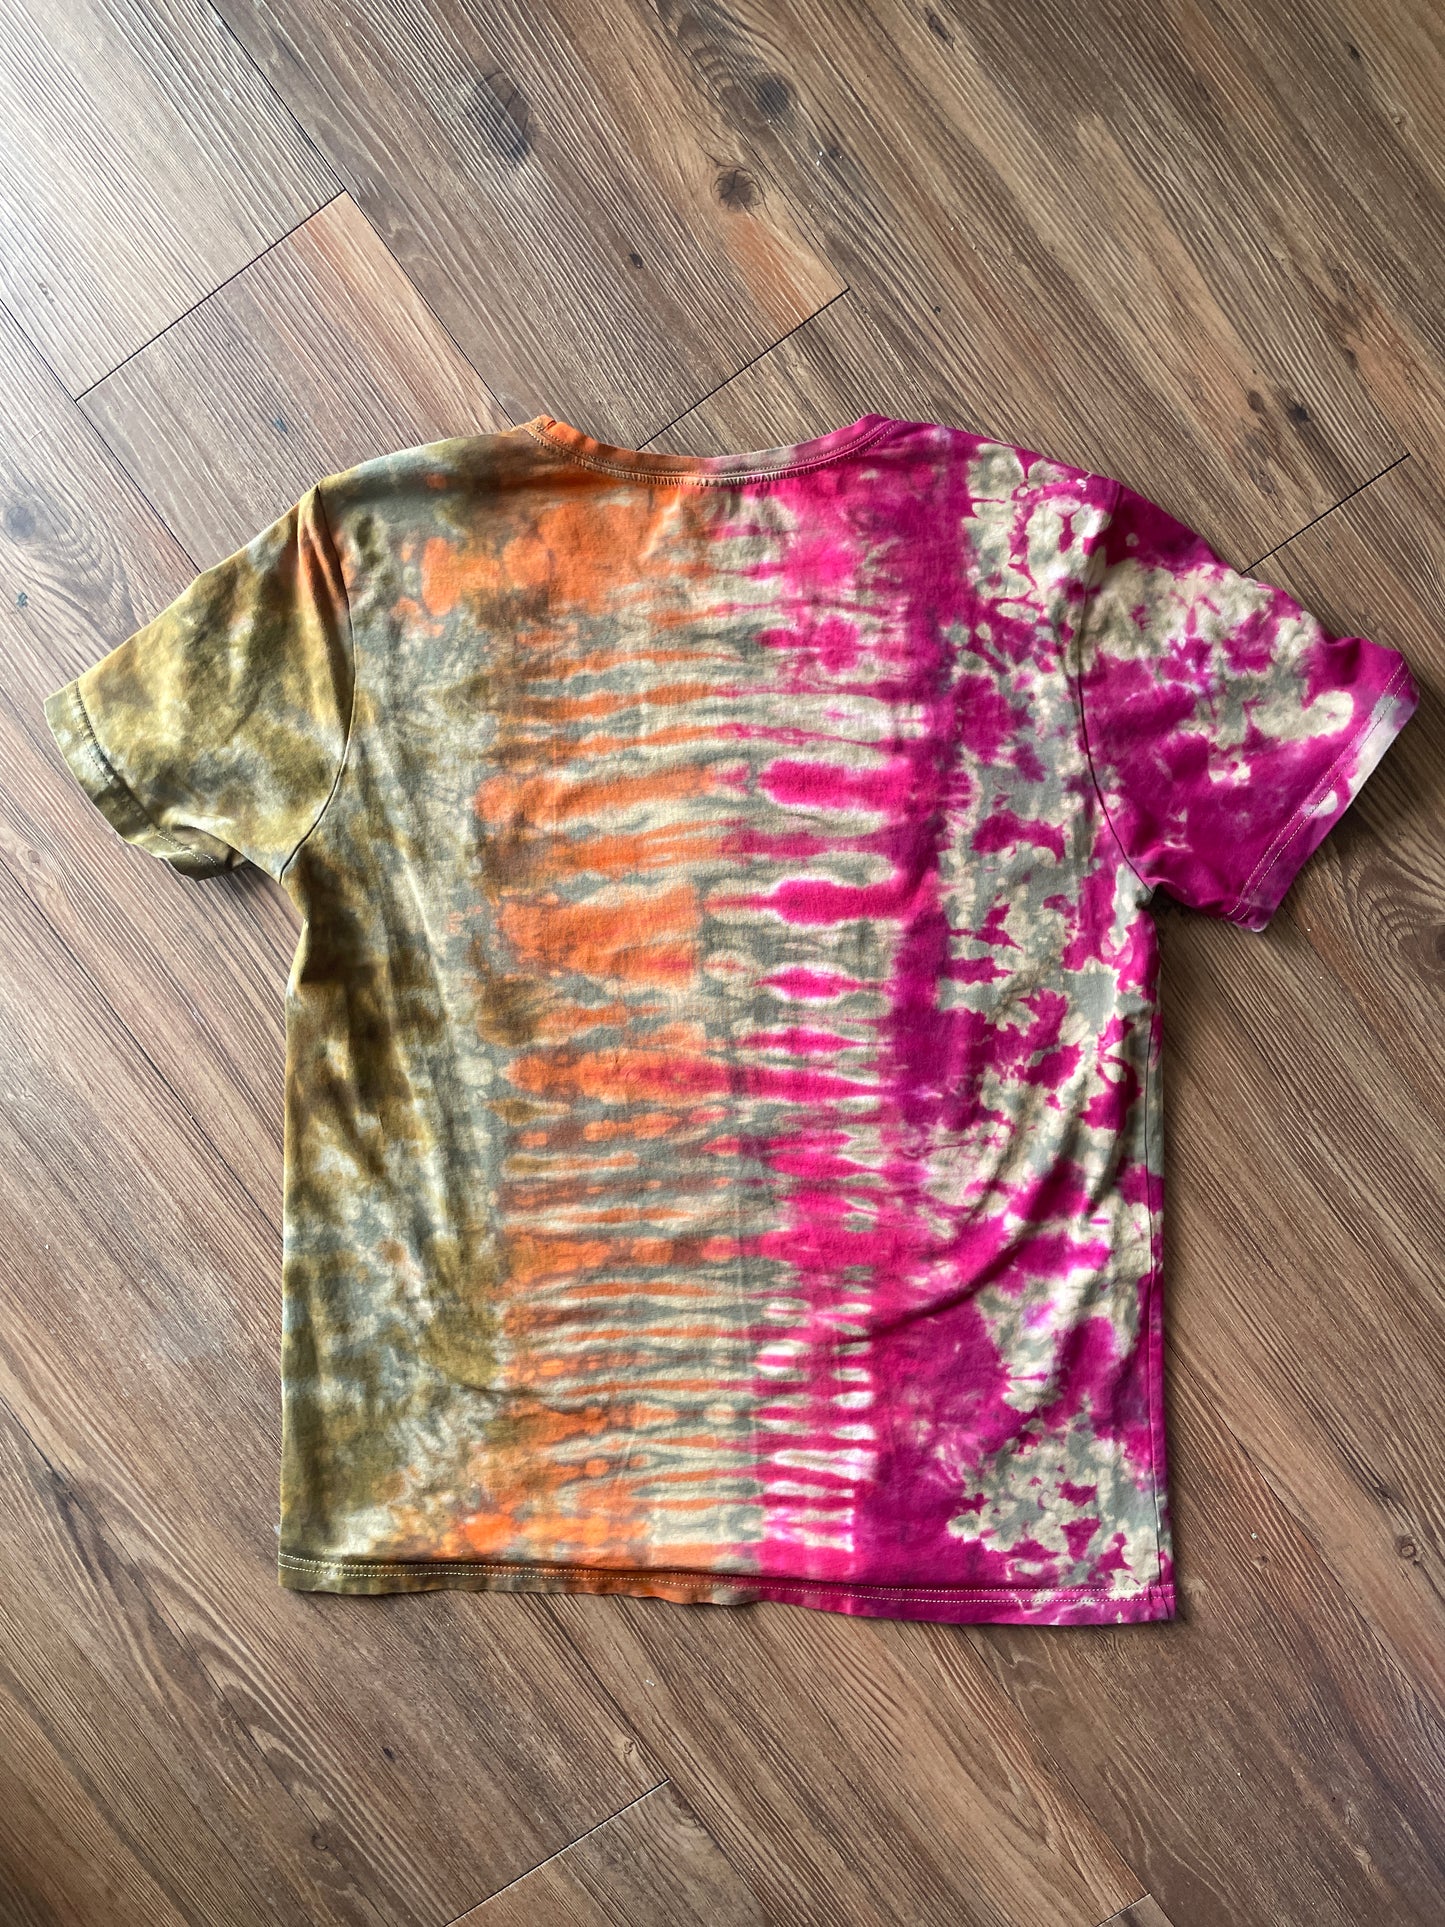 LARGE Women’s Happy and Sad Face You Decide Tie Dye T-Shirt | Green, Orange, and Pink Crumpled Handmade Short Sleeve Top